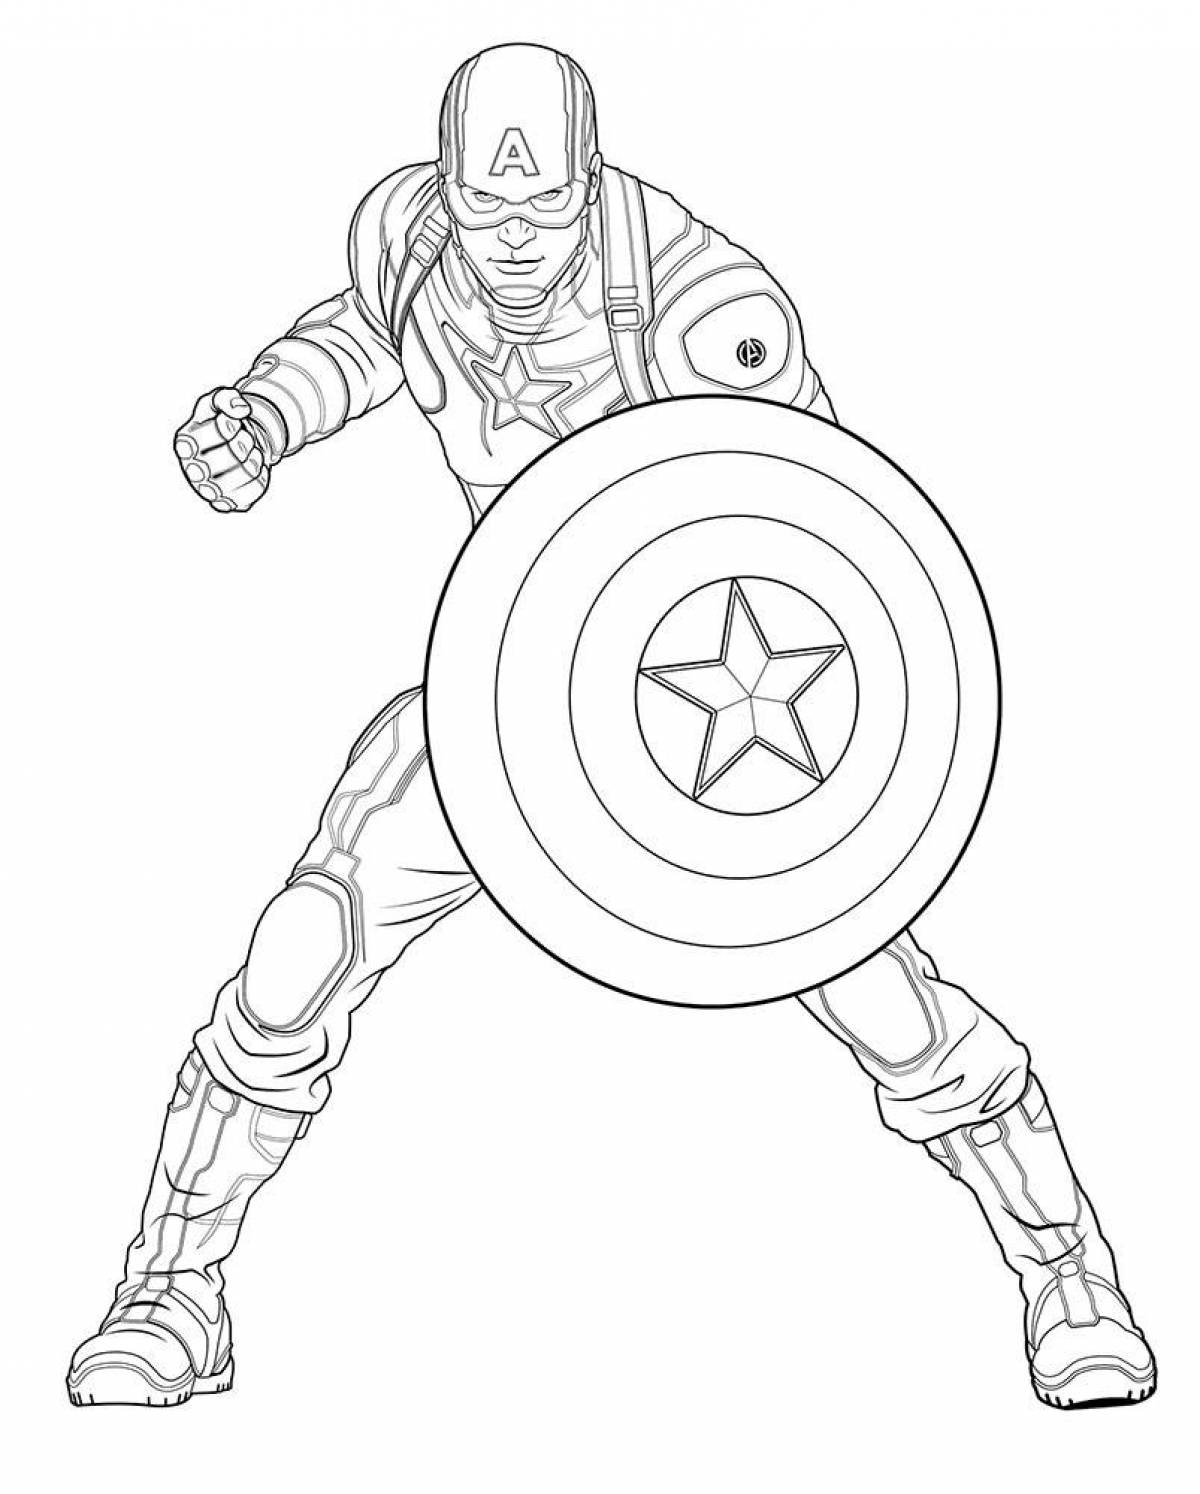 Brawl stars glowing coloring pages